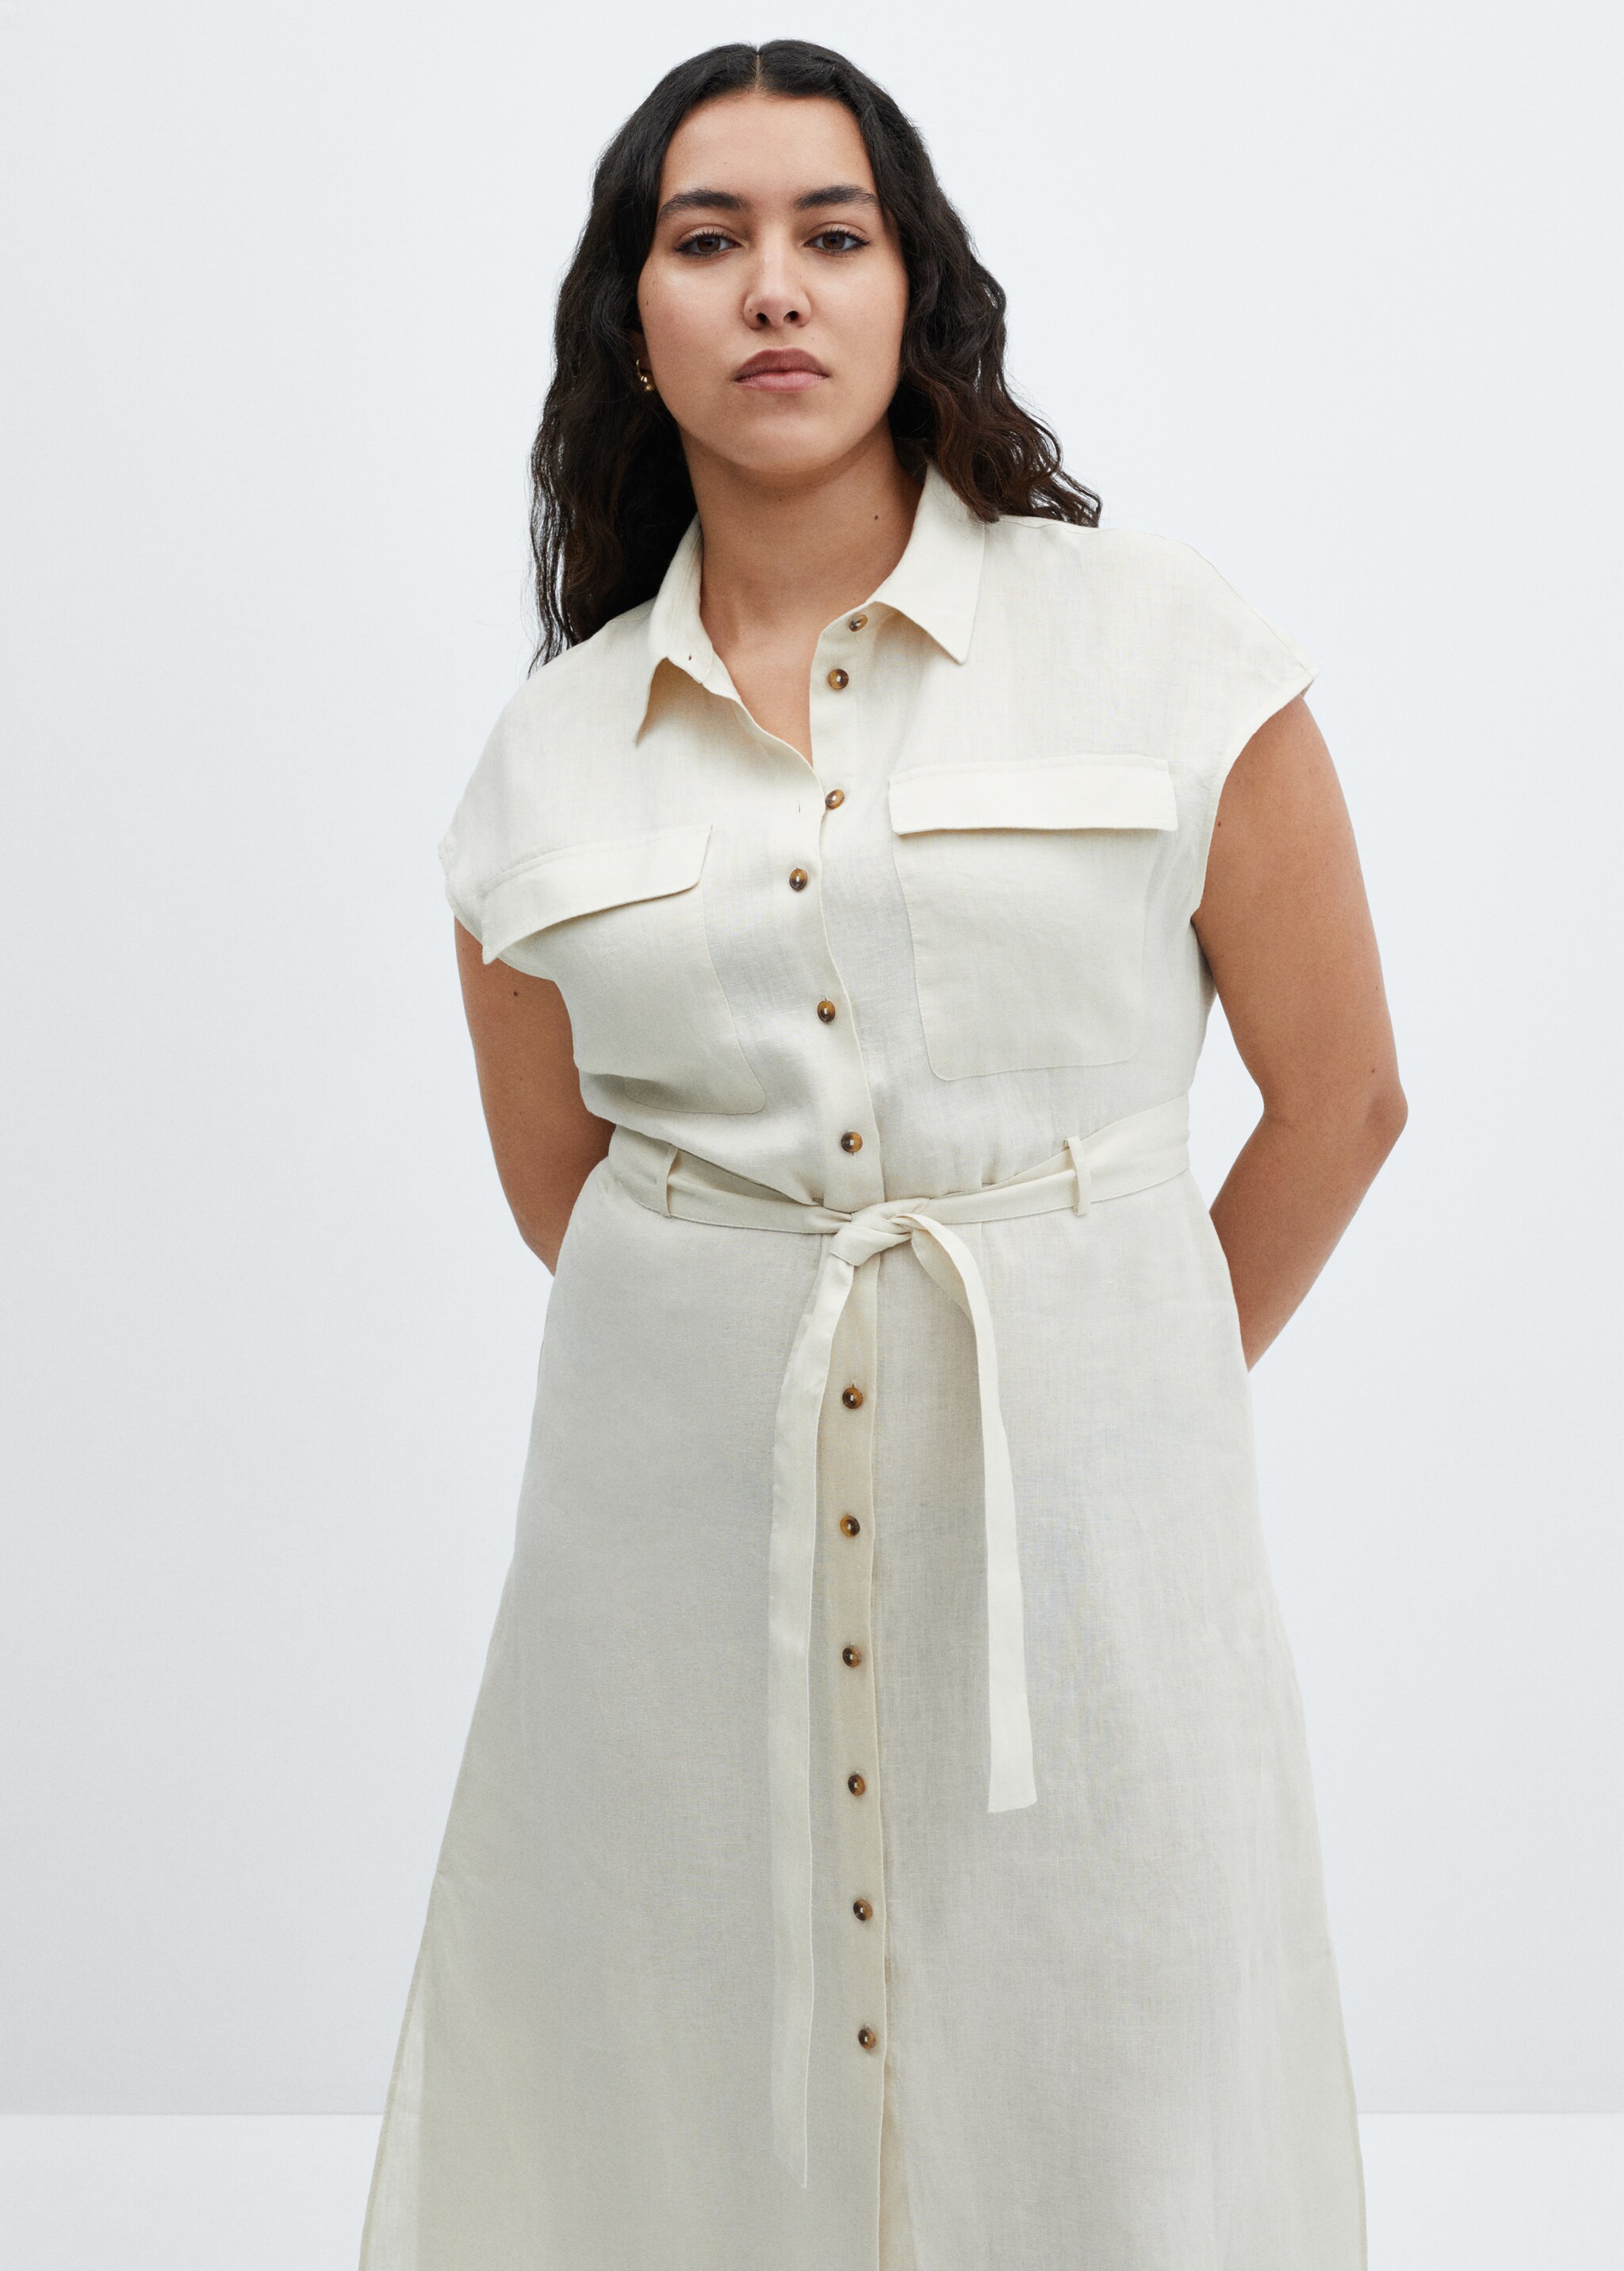 100% linen shirty dress - Details of the article 5